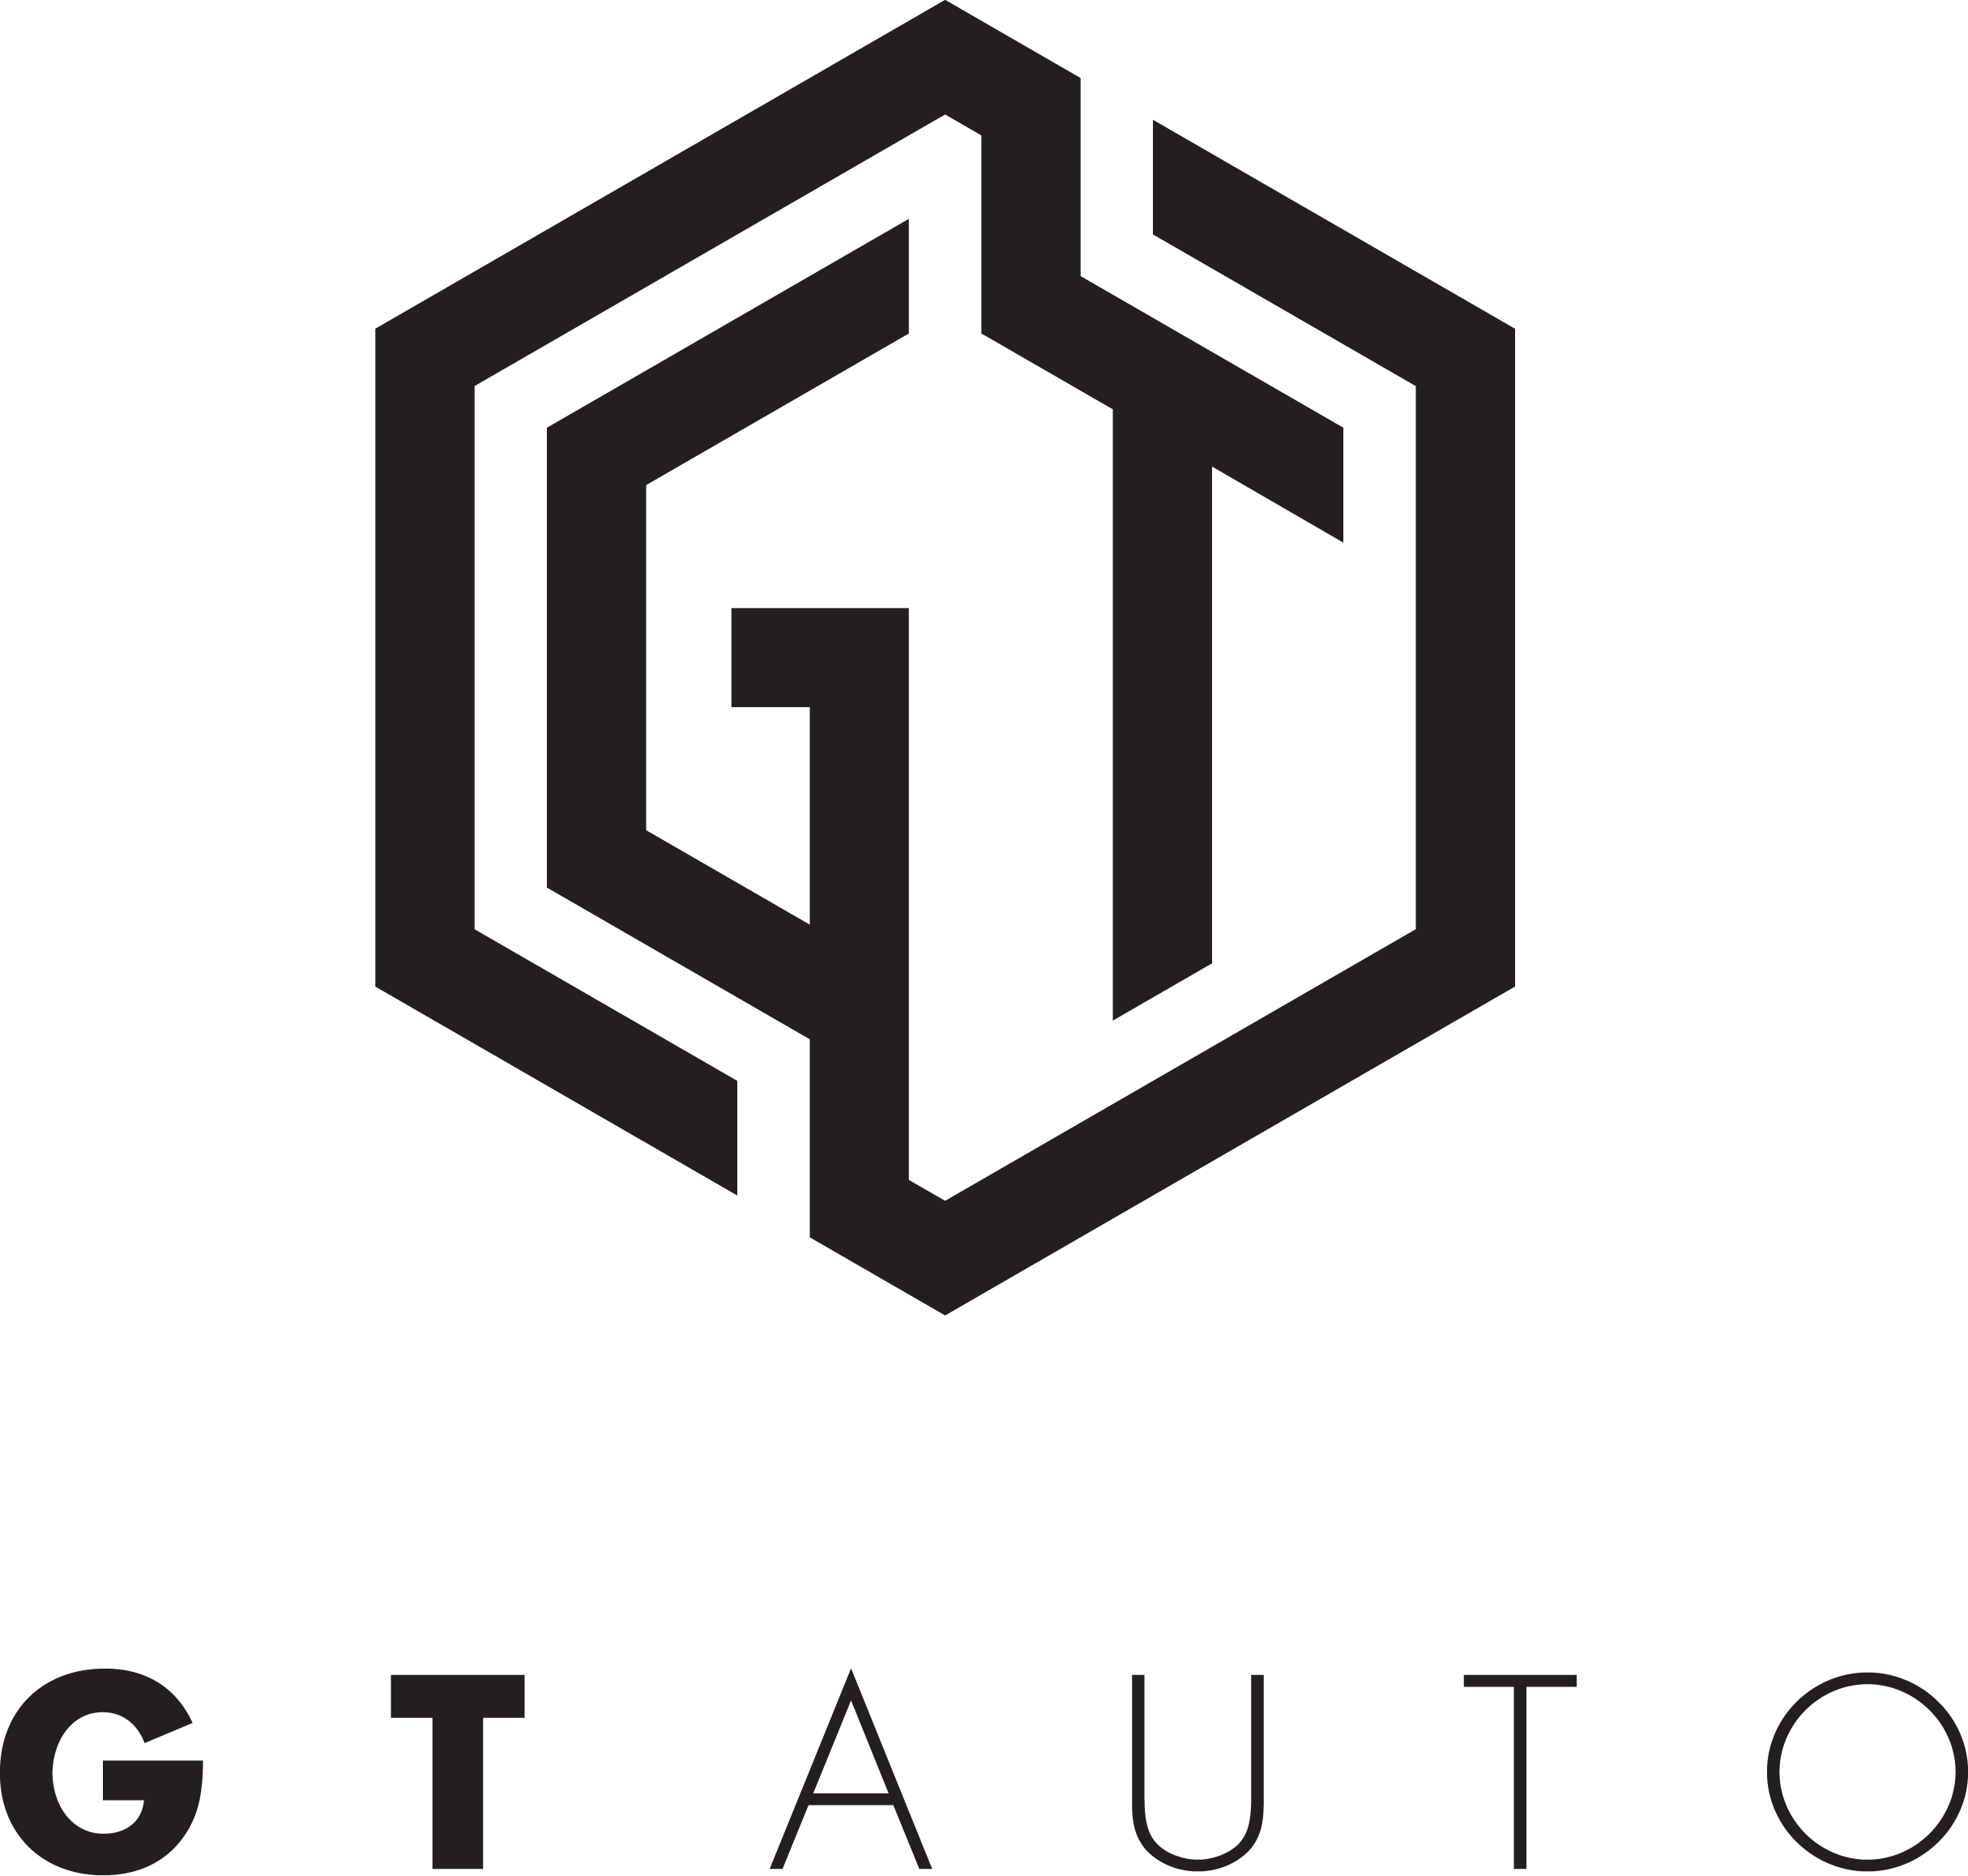 Auto Asset Logo - Collection Investment – G T A U T O